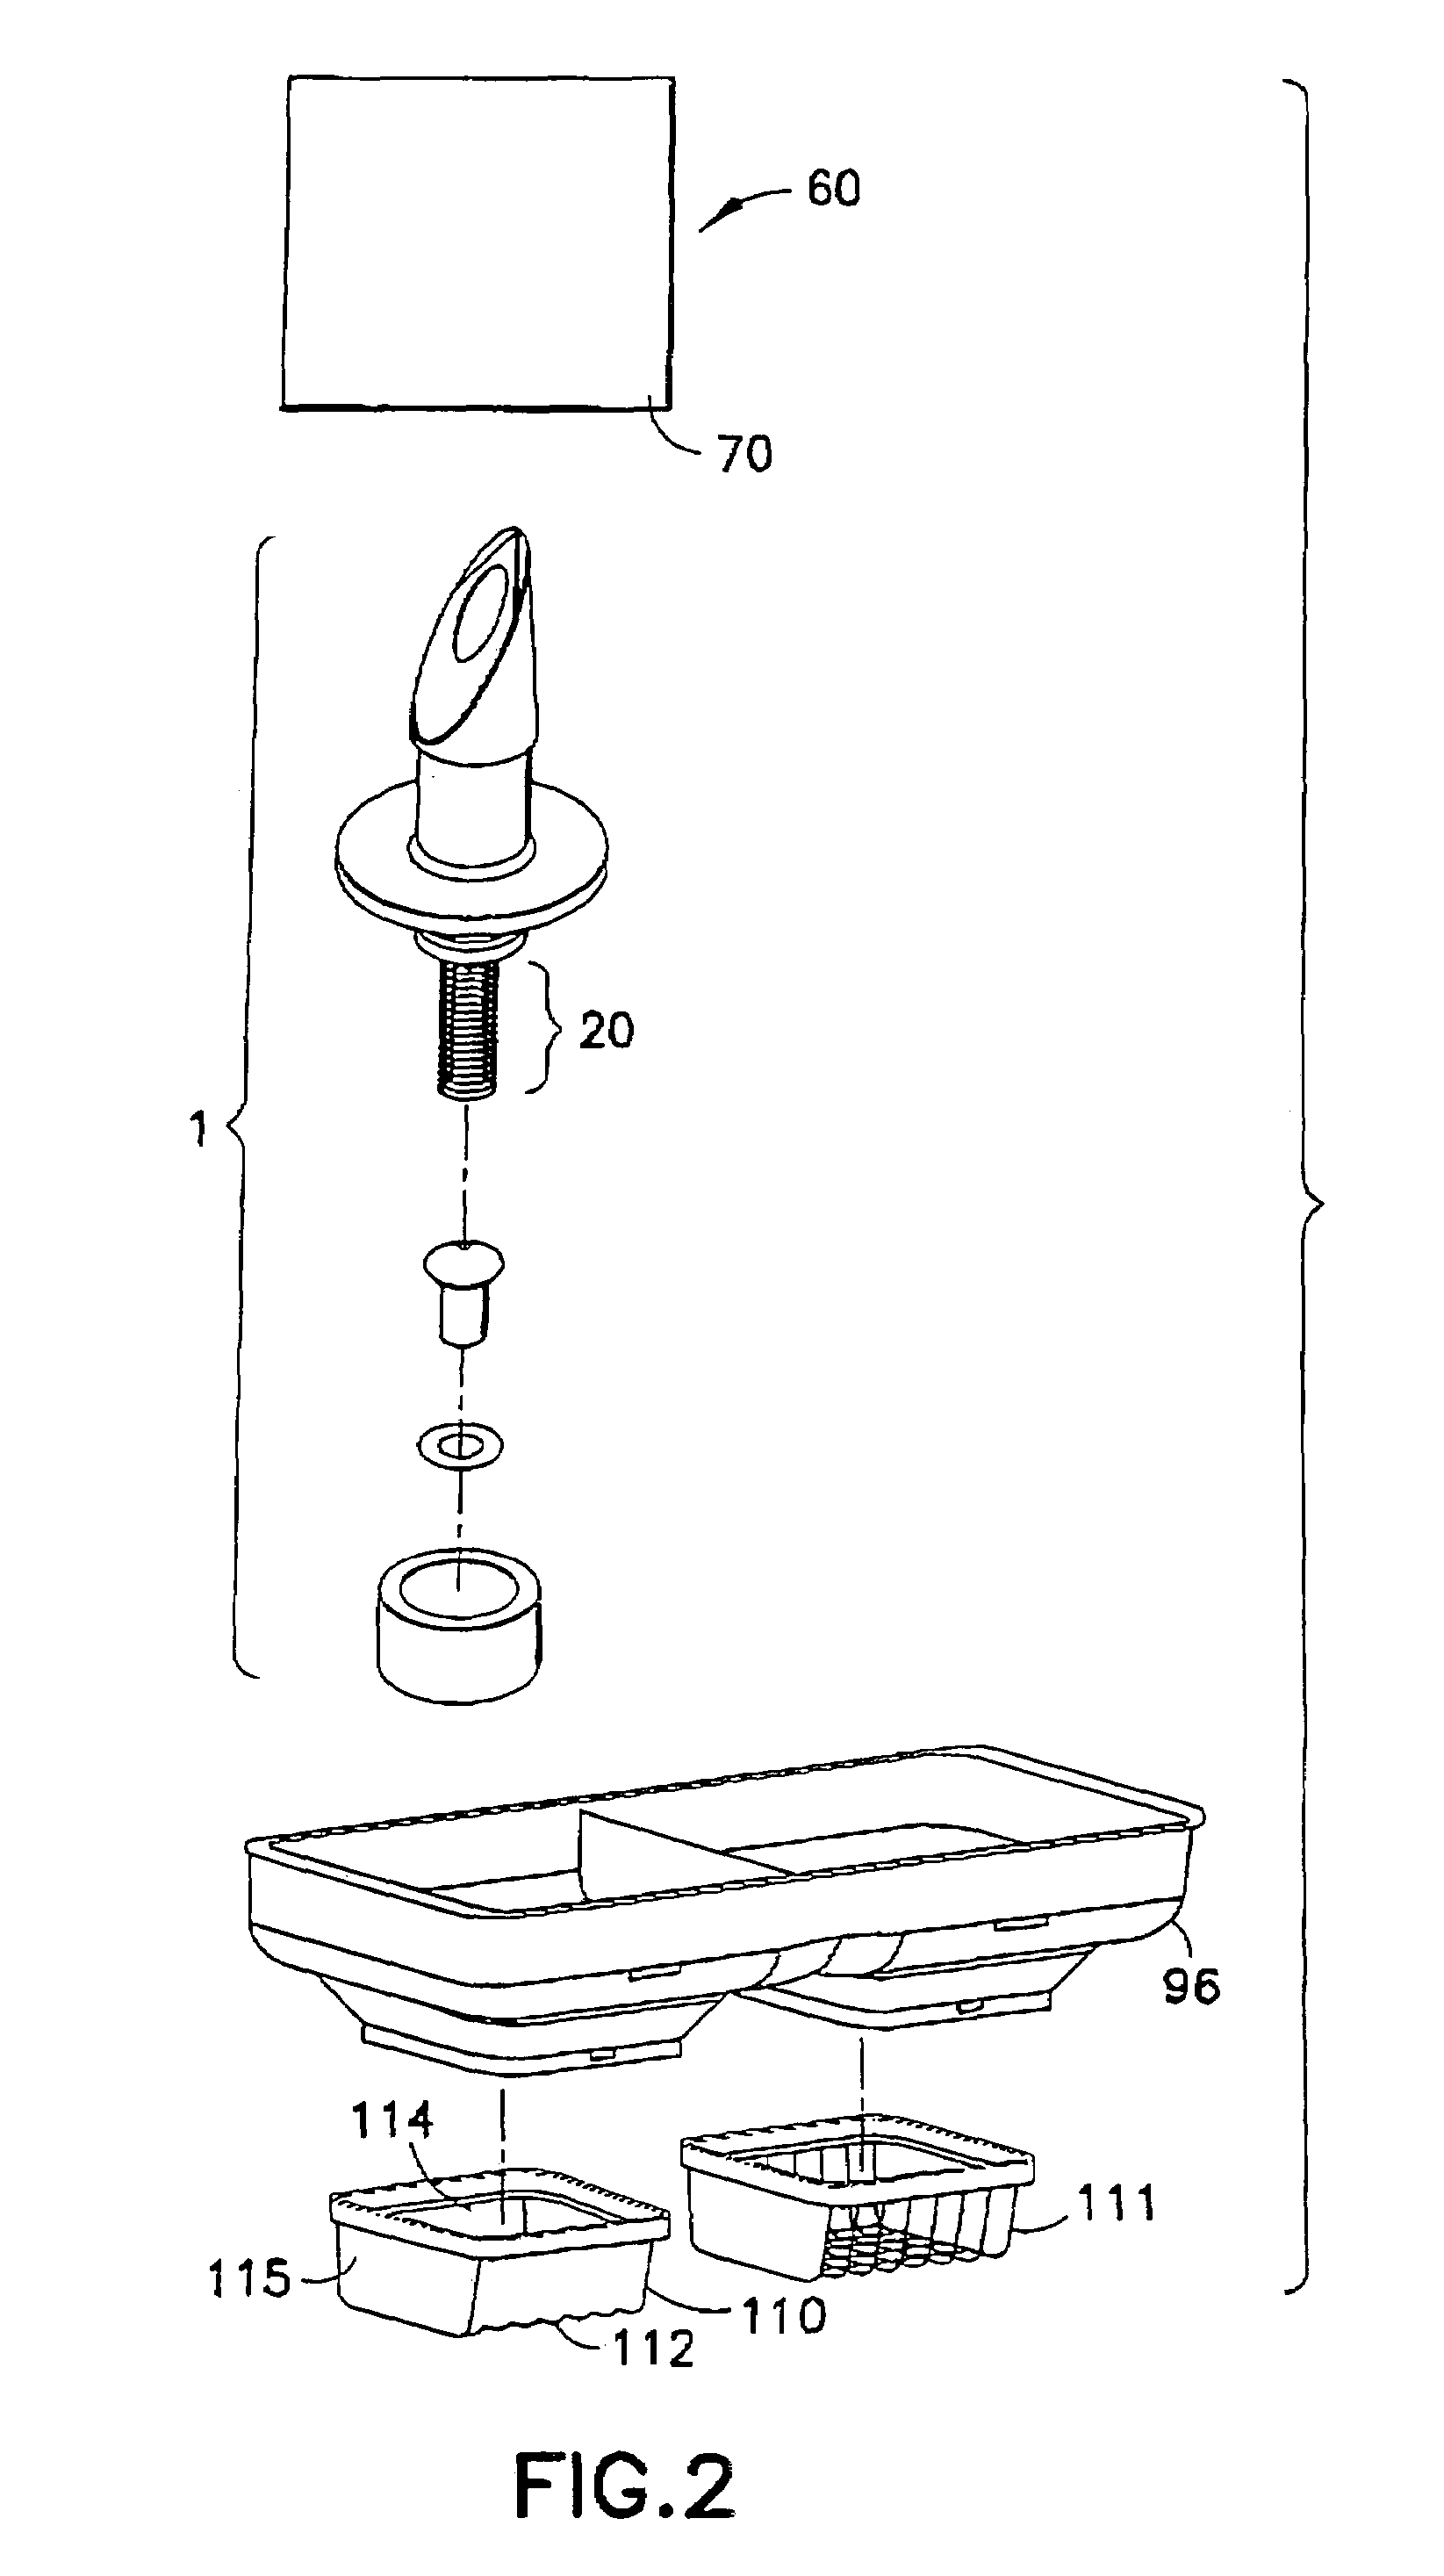 Method and system of providing sealed bags of fluid at the clean side of a laboratory facility